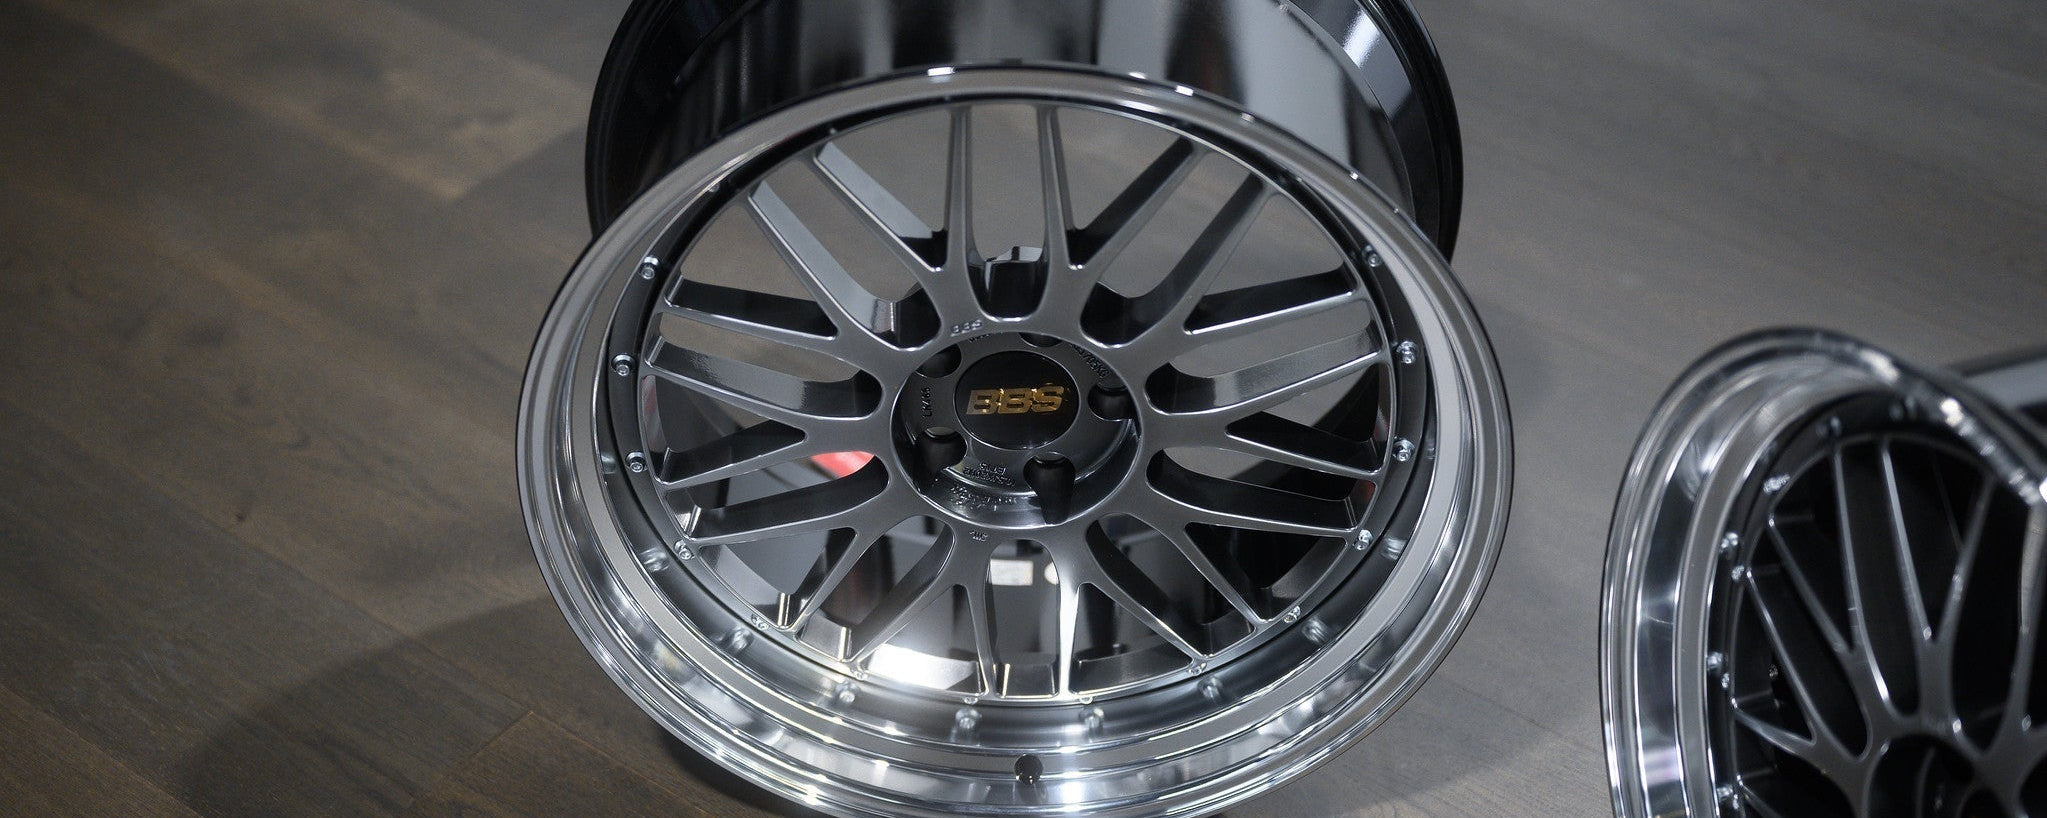 BBS LM for G8x M3 & M4 - Premium Wheels from BBS Japan - From just $8690.00! Shop now at MK MOTORSPORTS